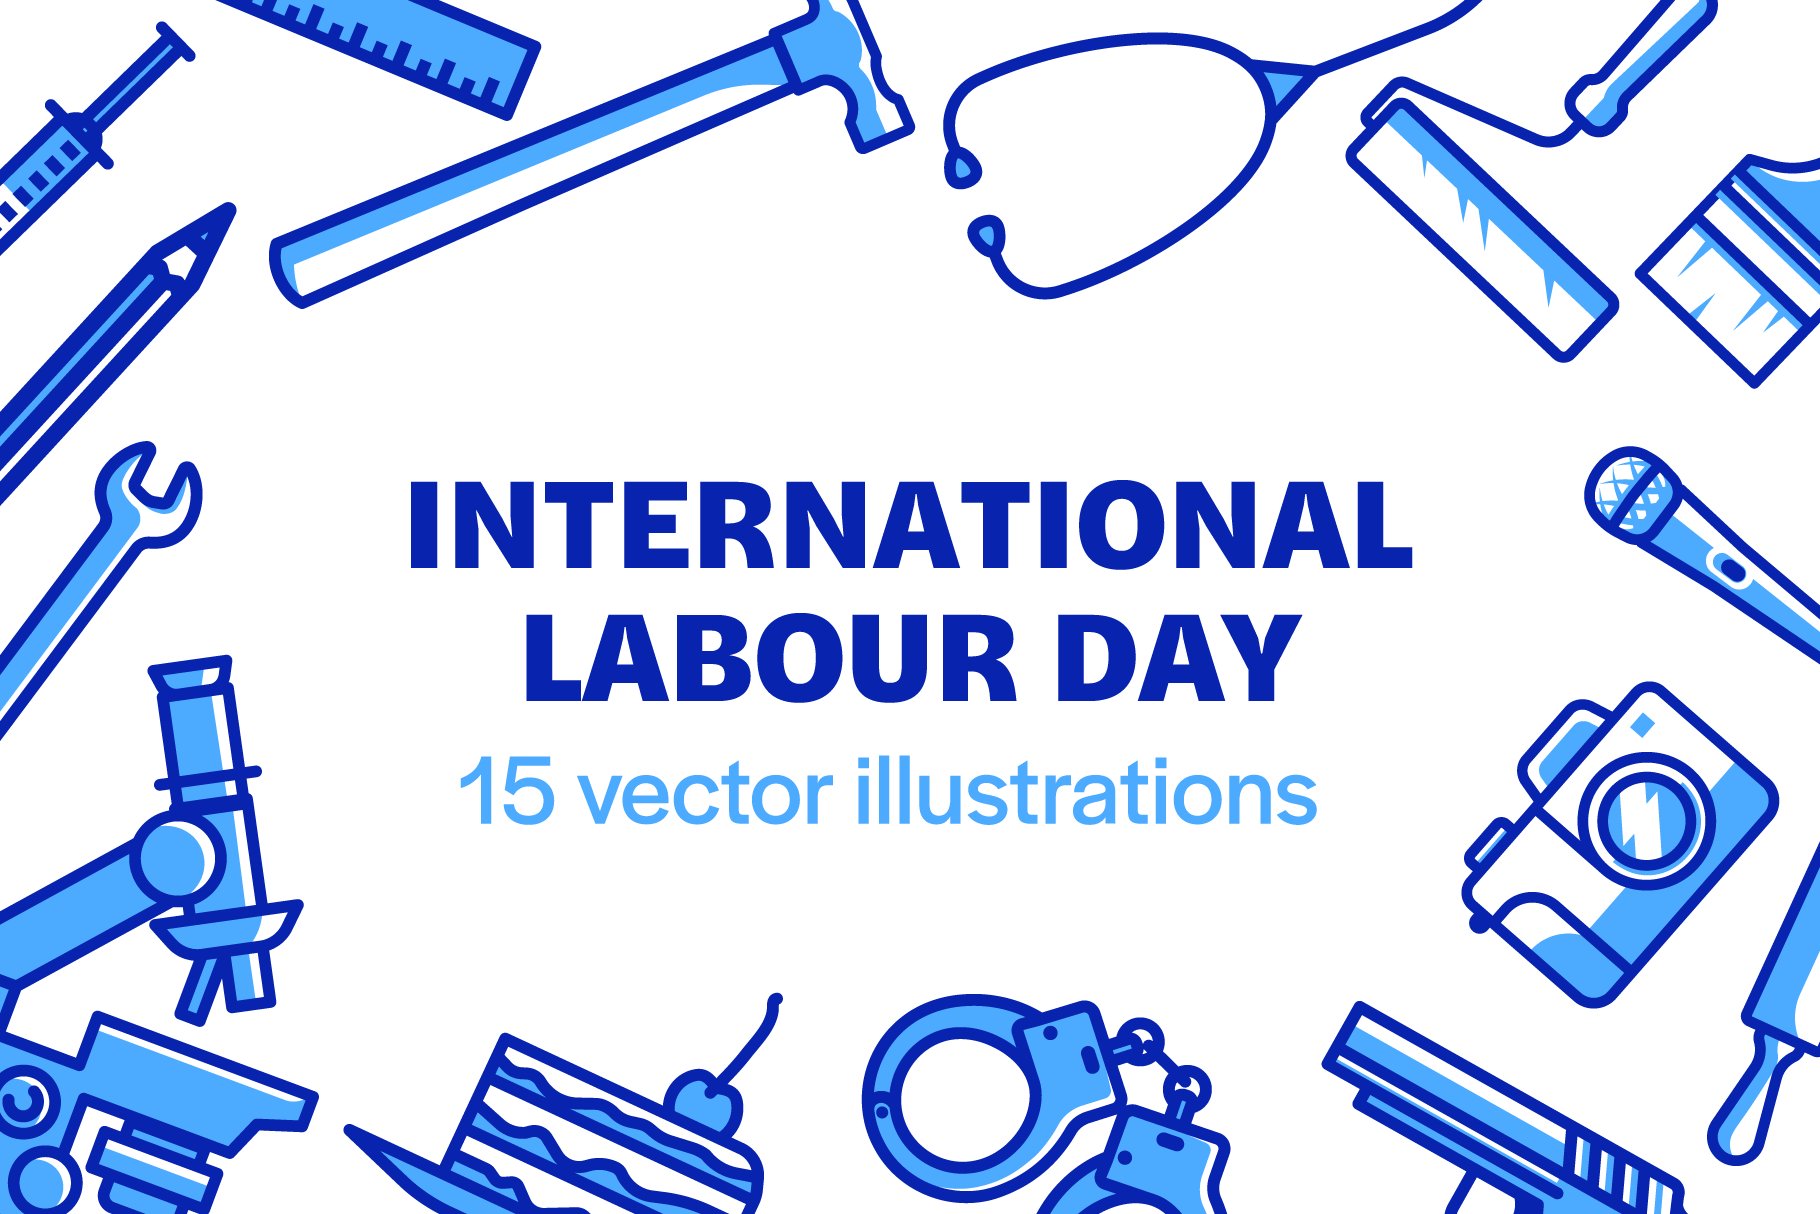 Set of tool icons for Labour Day cover image.